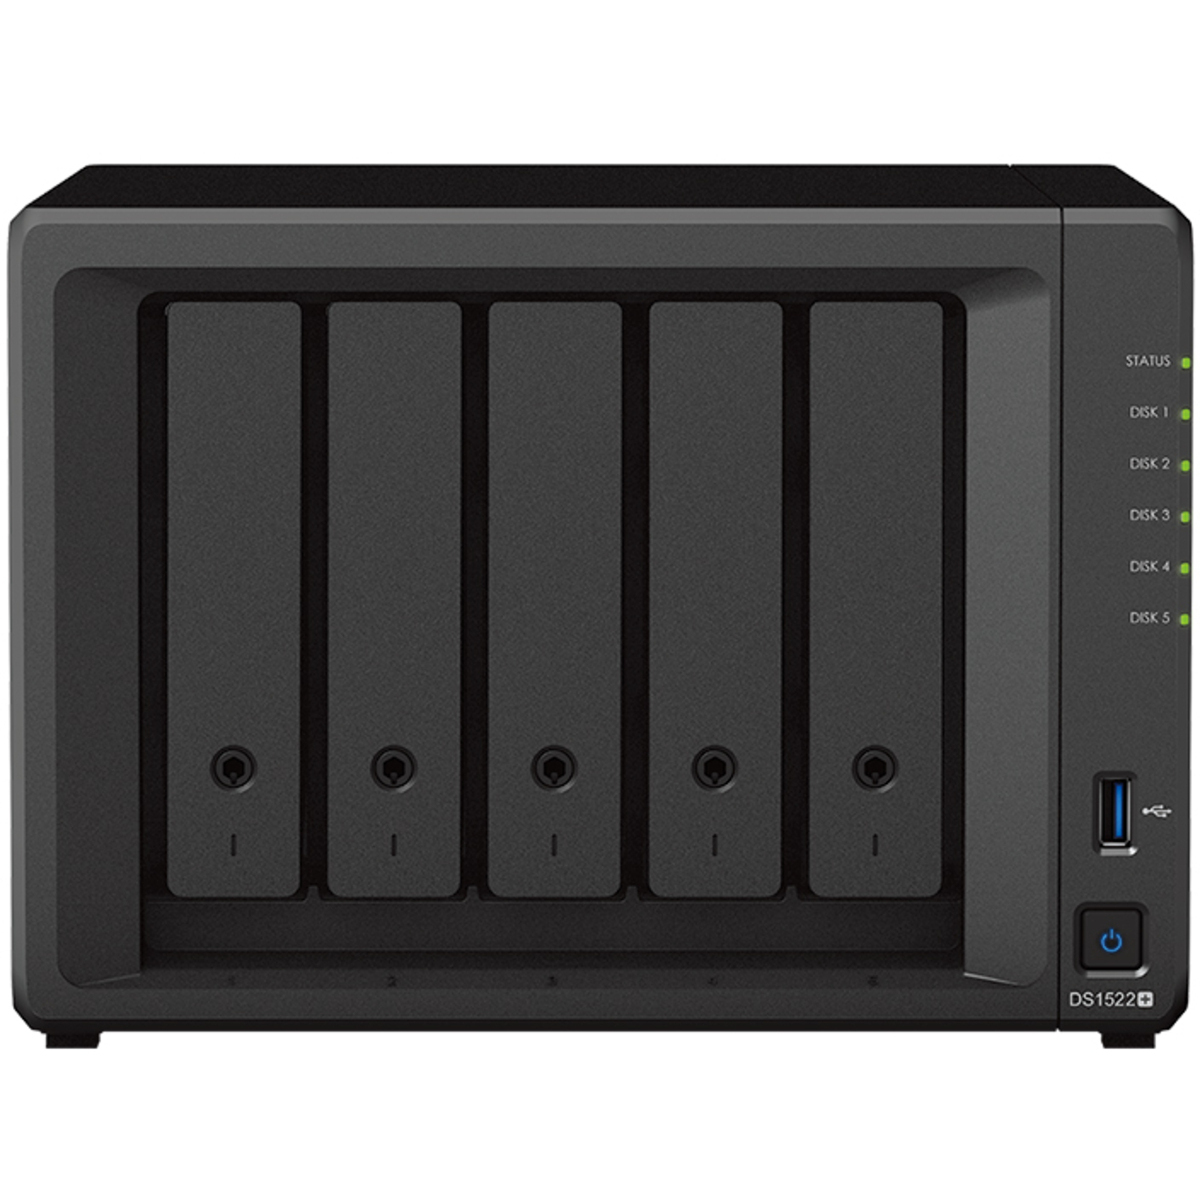 Synology DiskStation DS1522+ 90tb 5-Bay Desktop Multimedia / Power User / Business NAS - Network Attached Storage Device 5x18tb Seagate IronWolf Pro ST18000NT001 3.5 7200rpm SATA 6Gb/s HDD NAS Class Drives Installed - Burn-In Tested - ON SALE DiskStation DS1522+